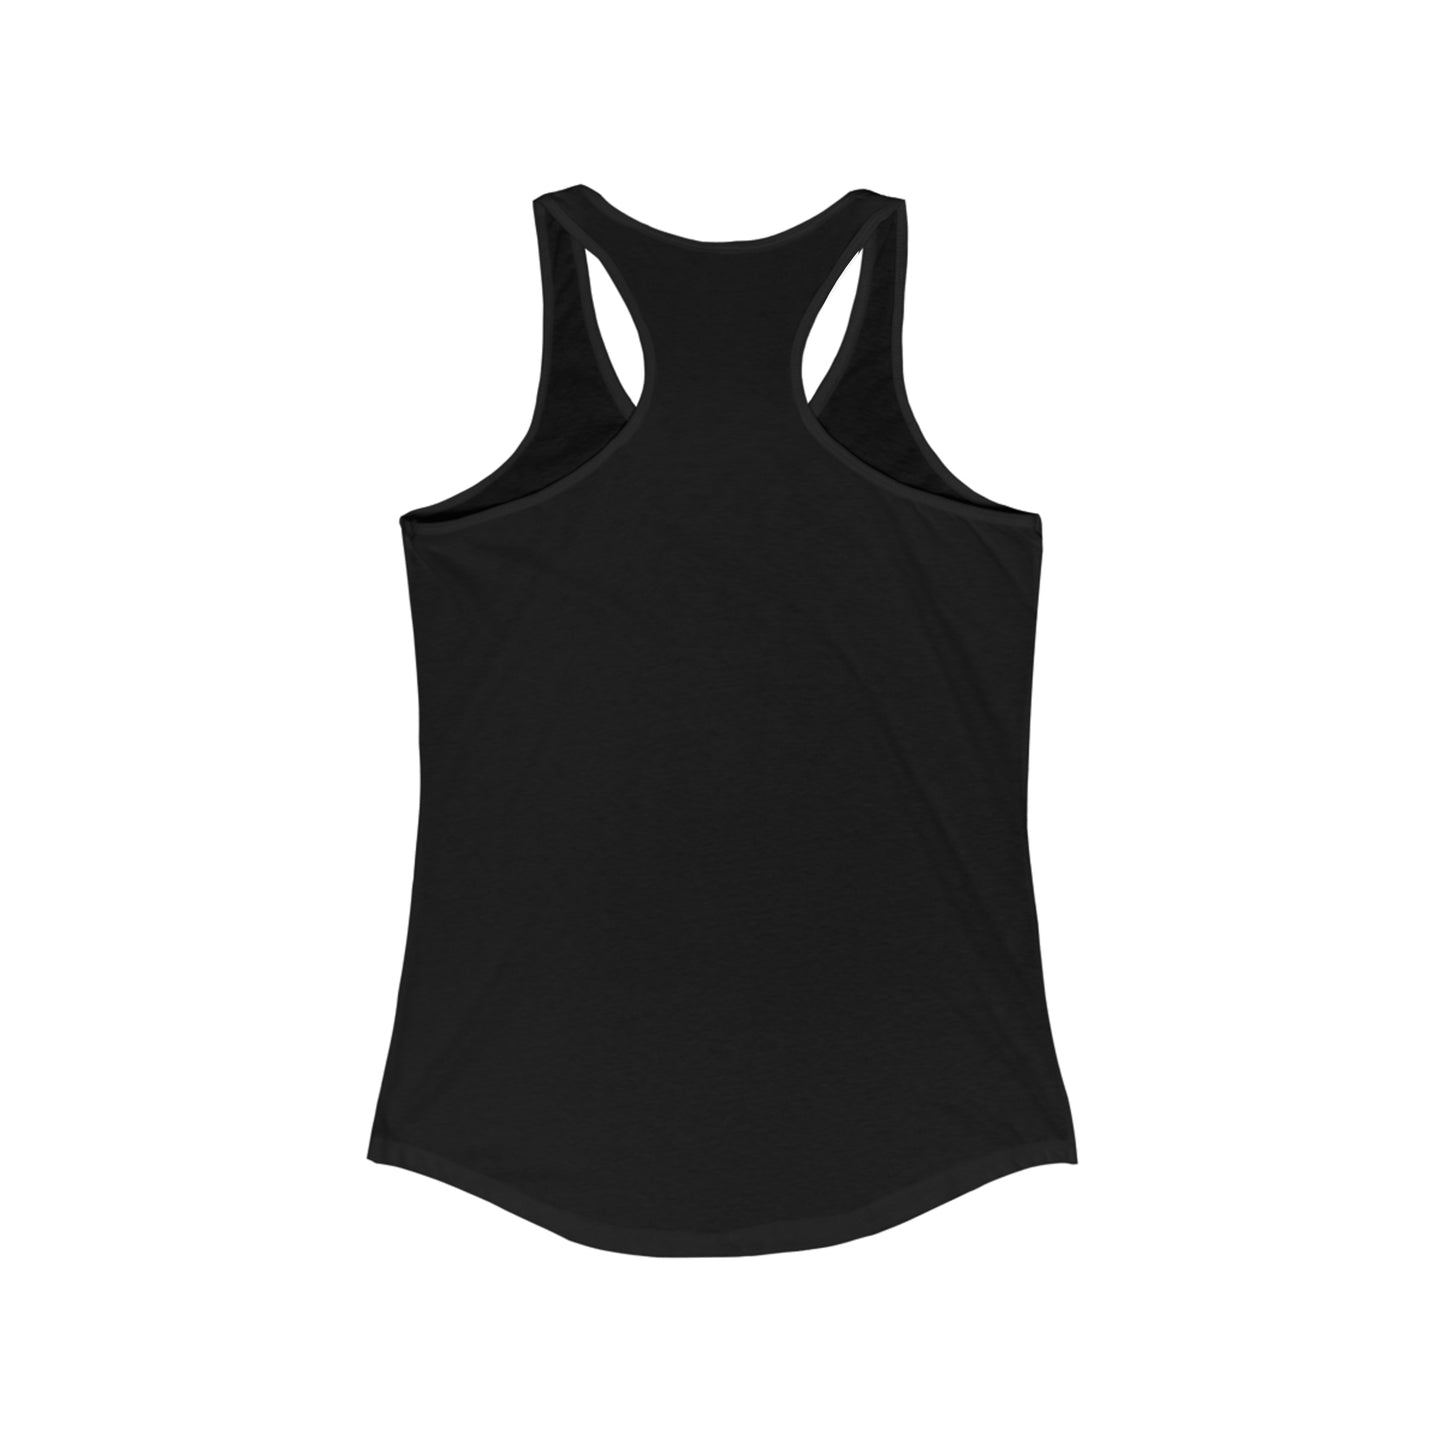 'Touch the Monster' [Option 2] Women's Ideal Racerback Tank